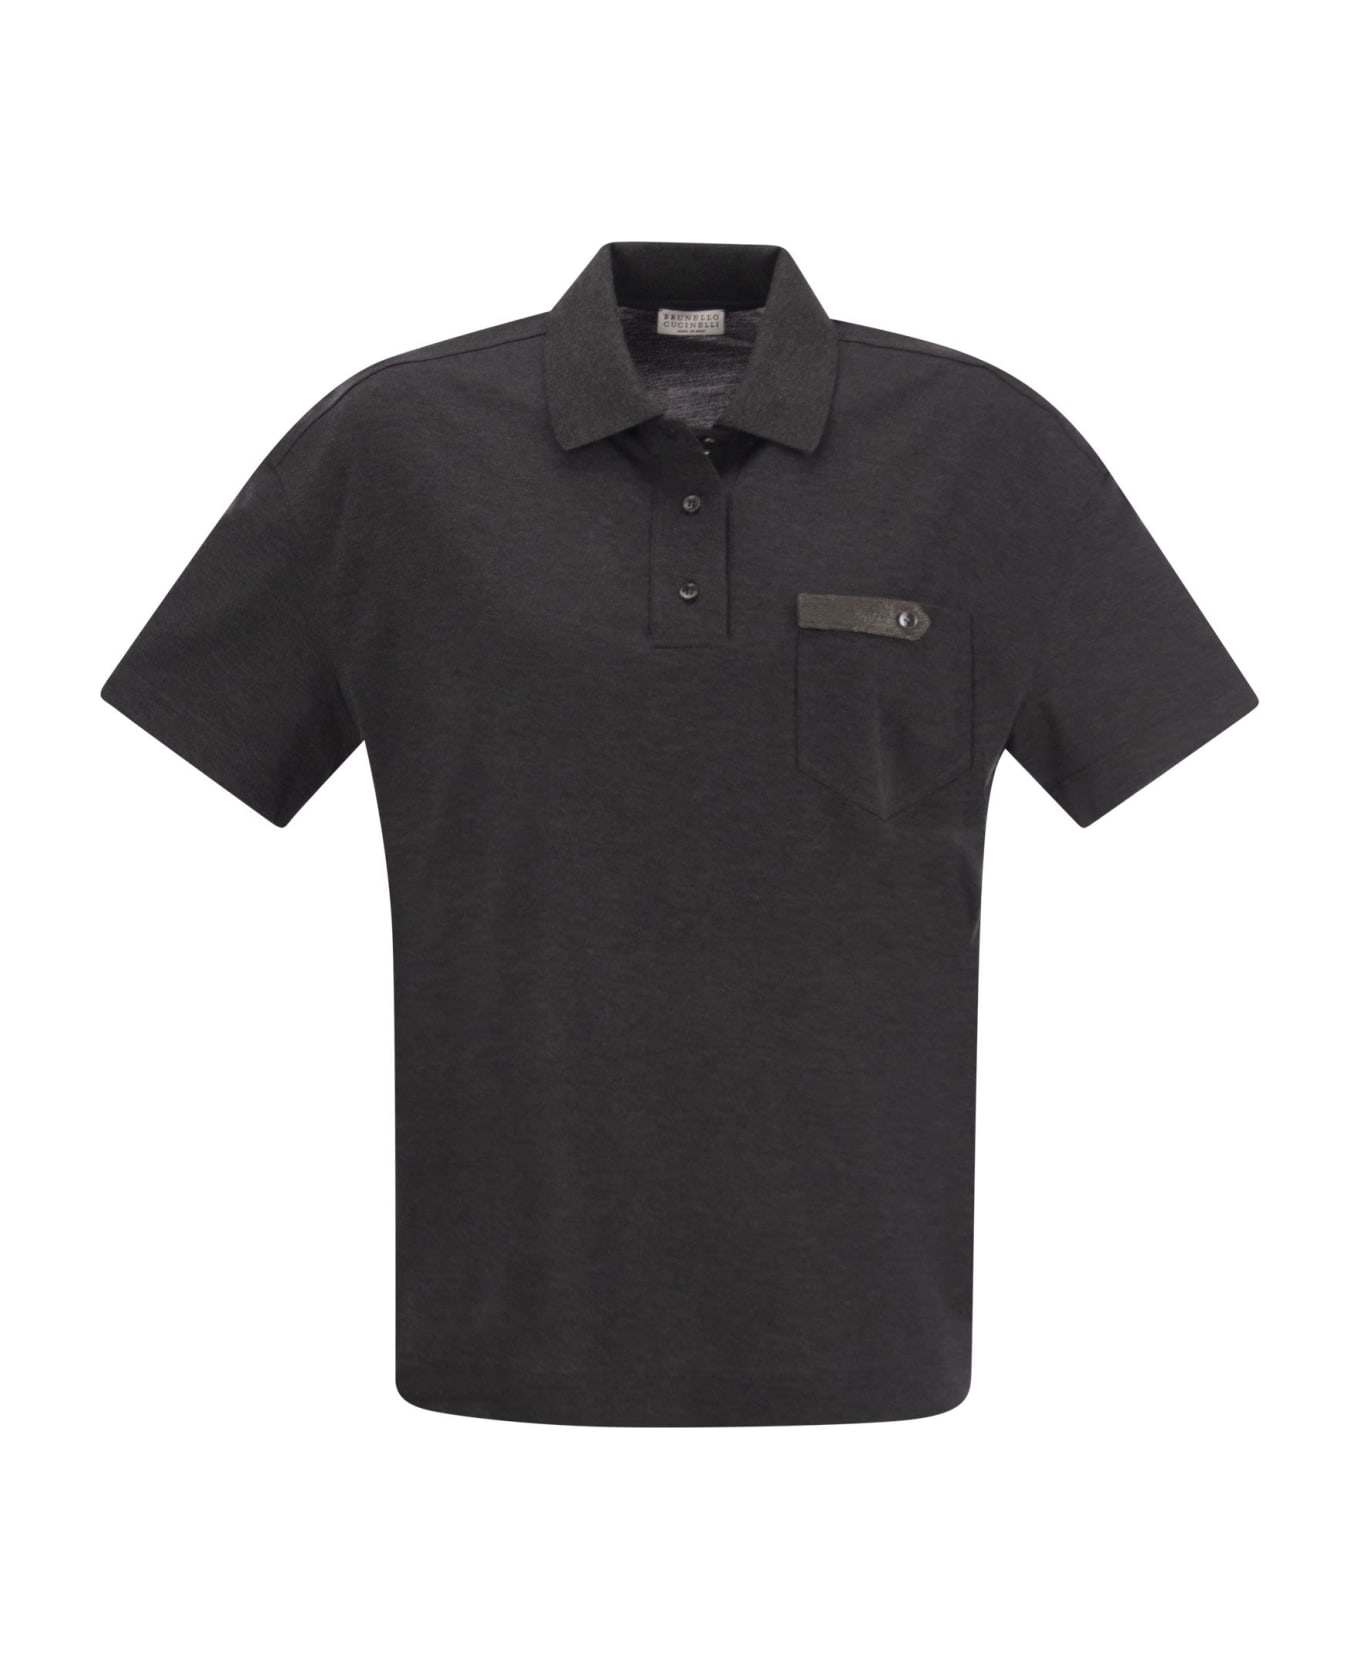 Brunello Cucinelli Lightweight Cotton Jersey Polo Shirt With Precious Button Tab - Anthracite